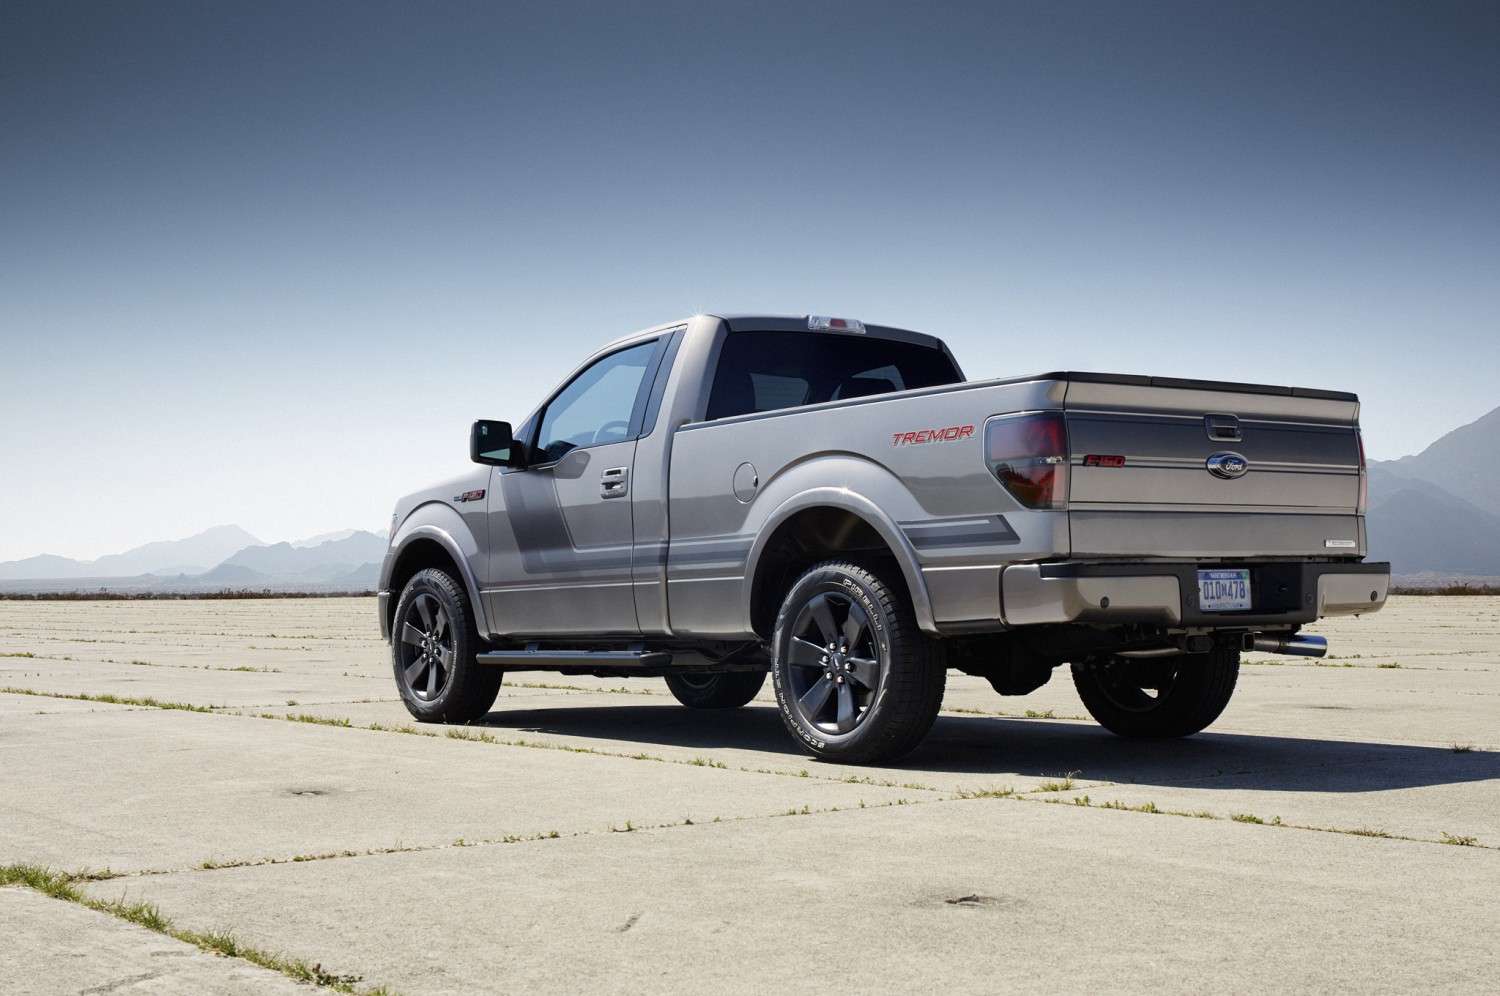 2014 Ford F-150 Tremor Rear Side View